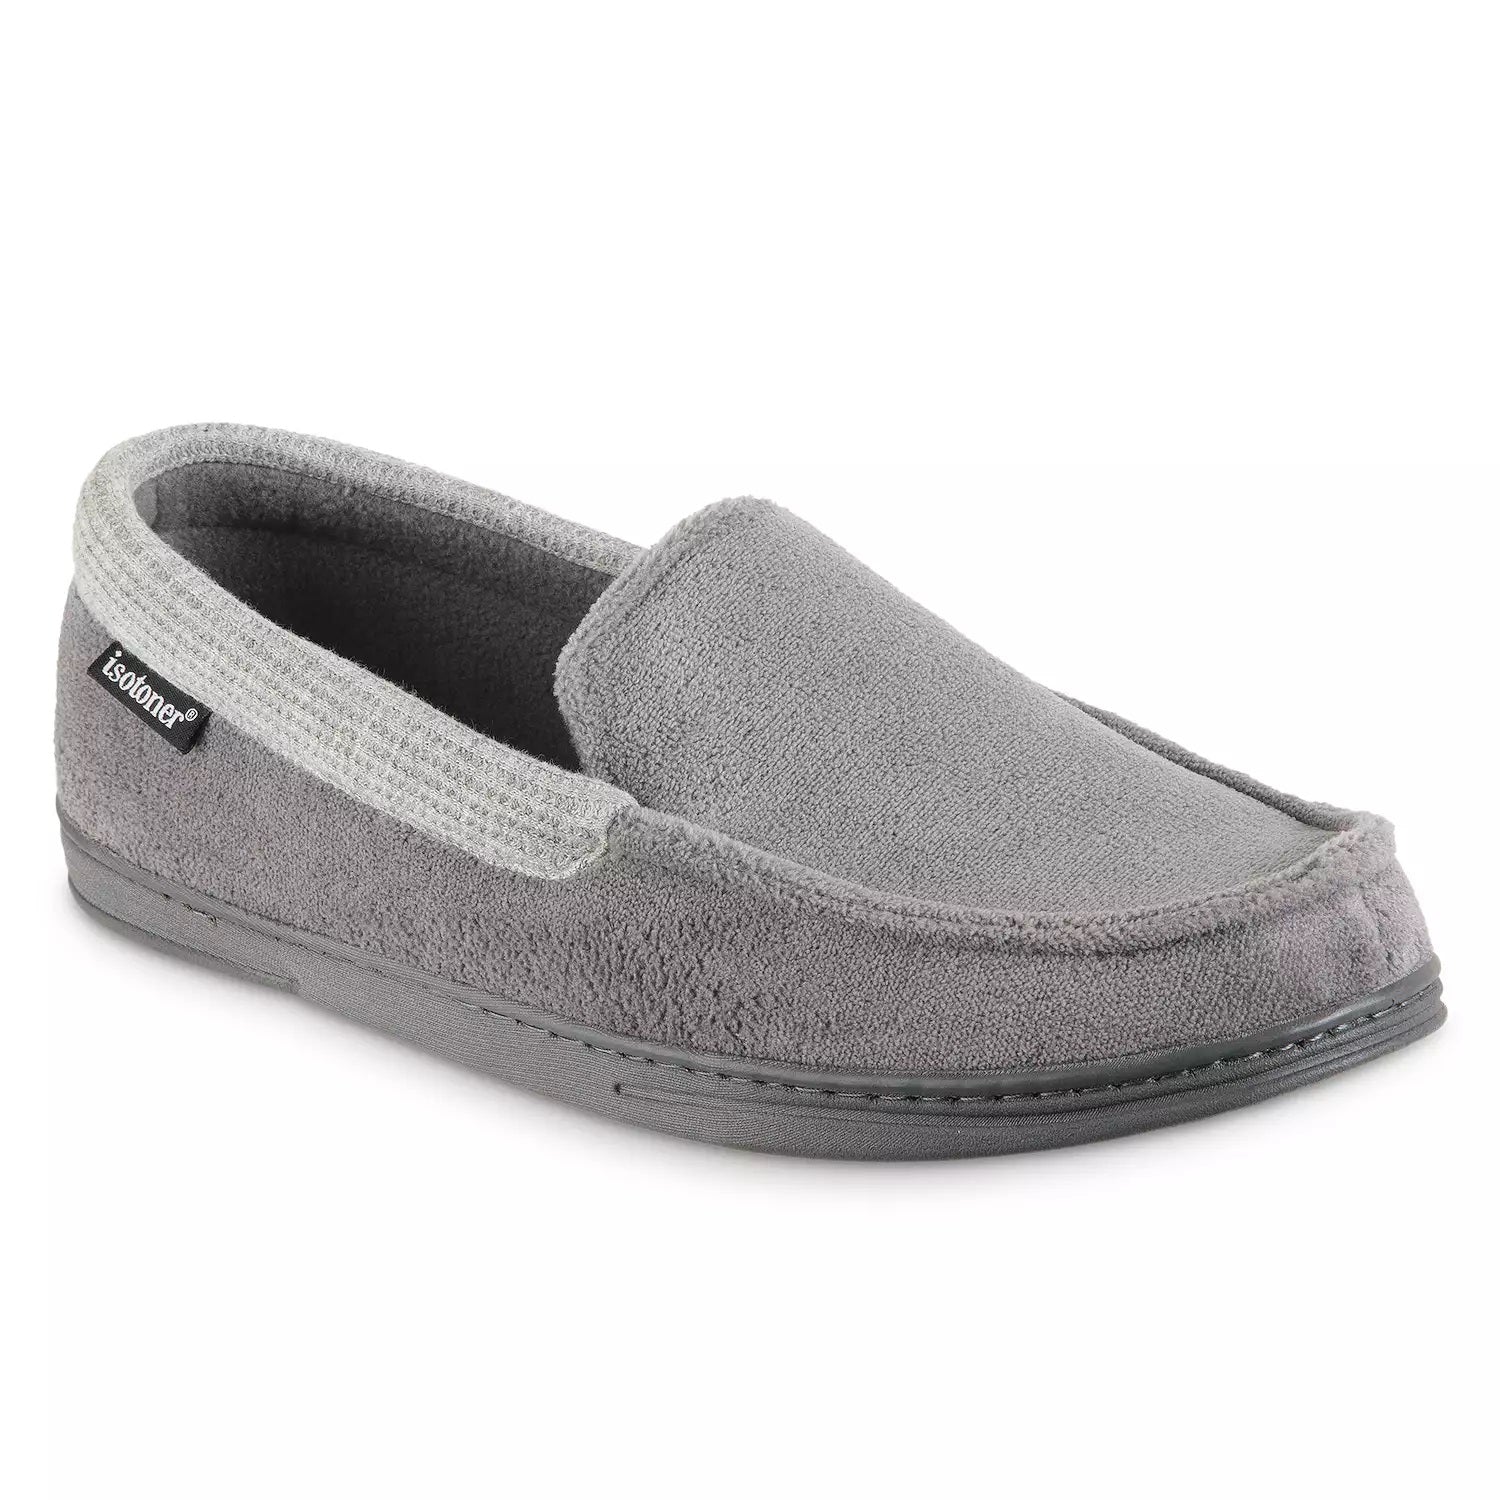 isotoner Men's Microterry and Waffle Travis Moccasin Slippers with Memory Foam Insole and Durable Rubber Outsole, Ash L 9.5-10.5